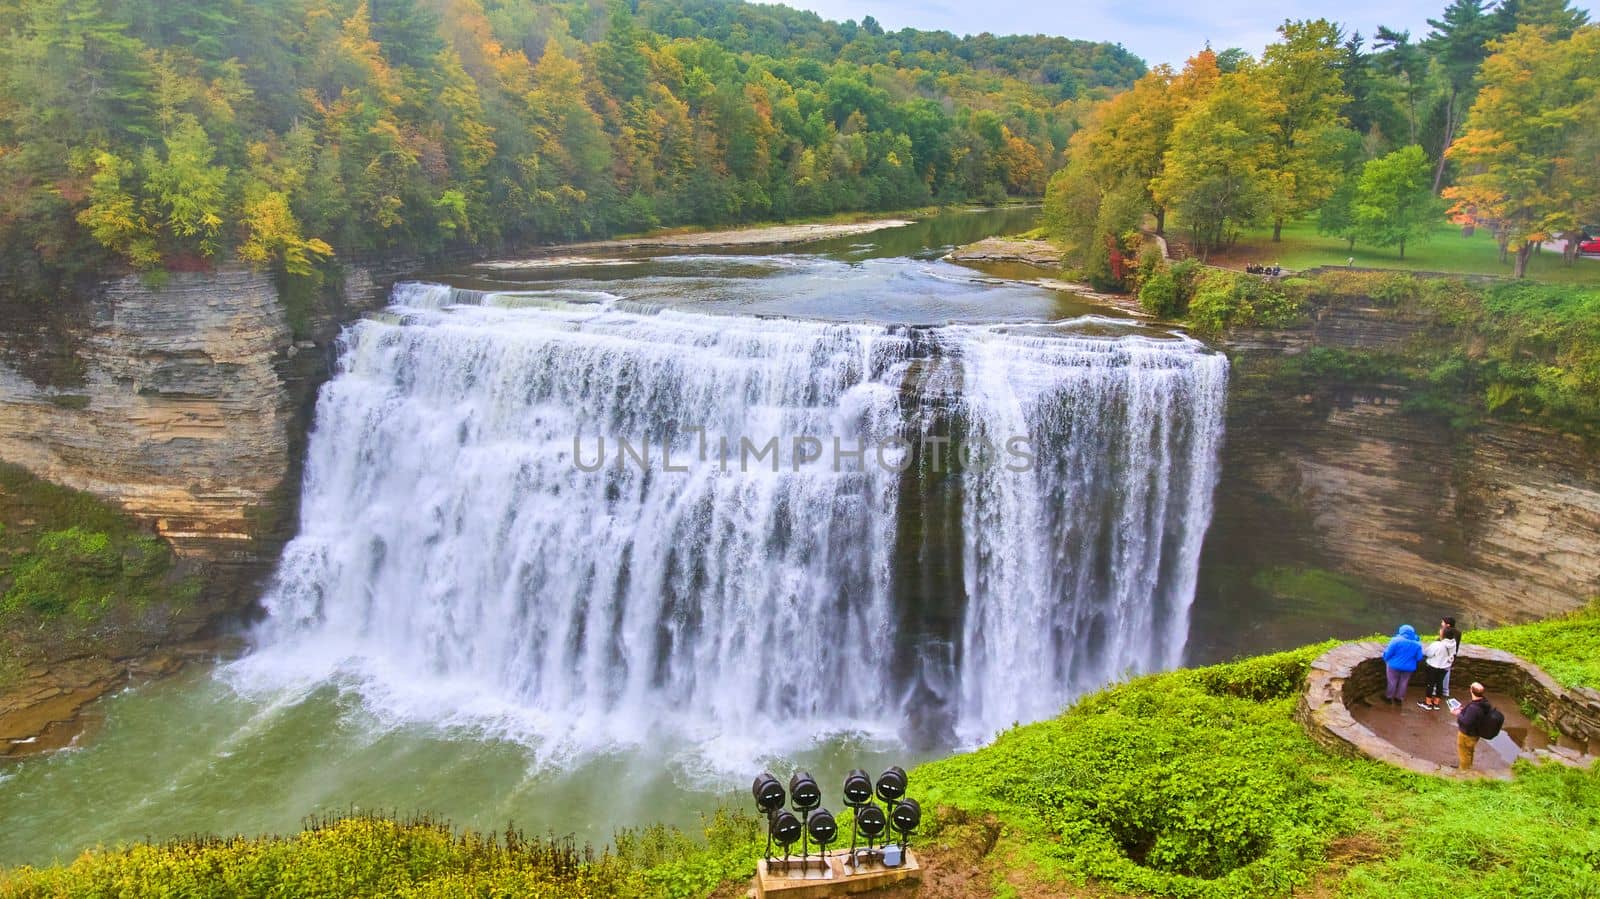 Image of Huge raging waterfall in river through canyon with colorful foliage and tourists admiring from vista